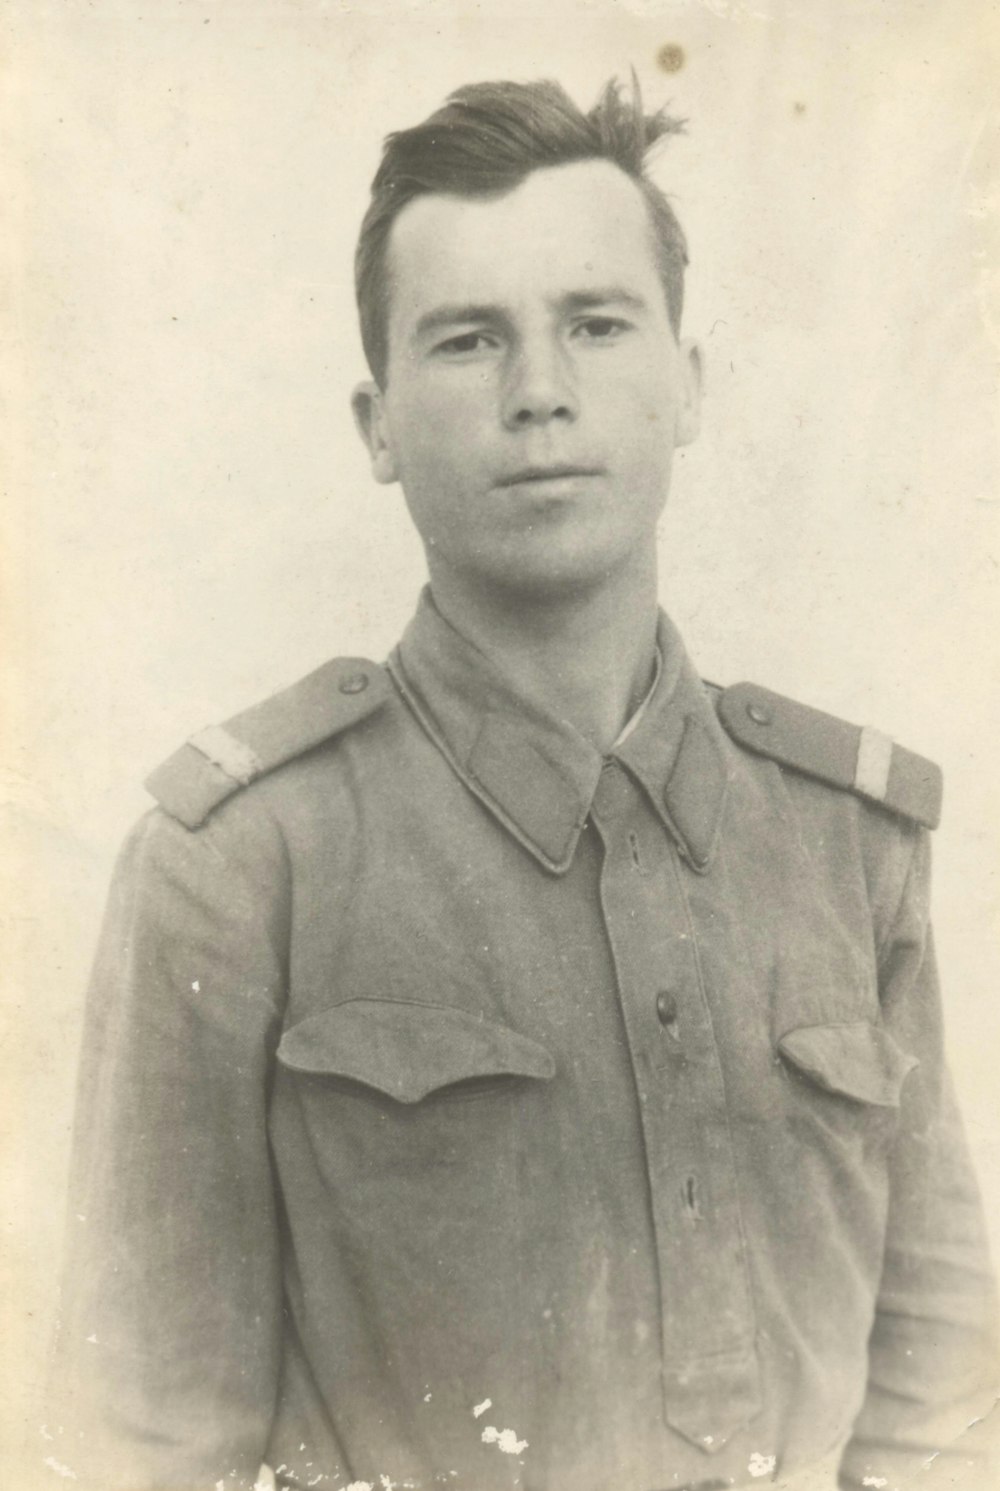 a black and white photo of a man in uniform